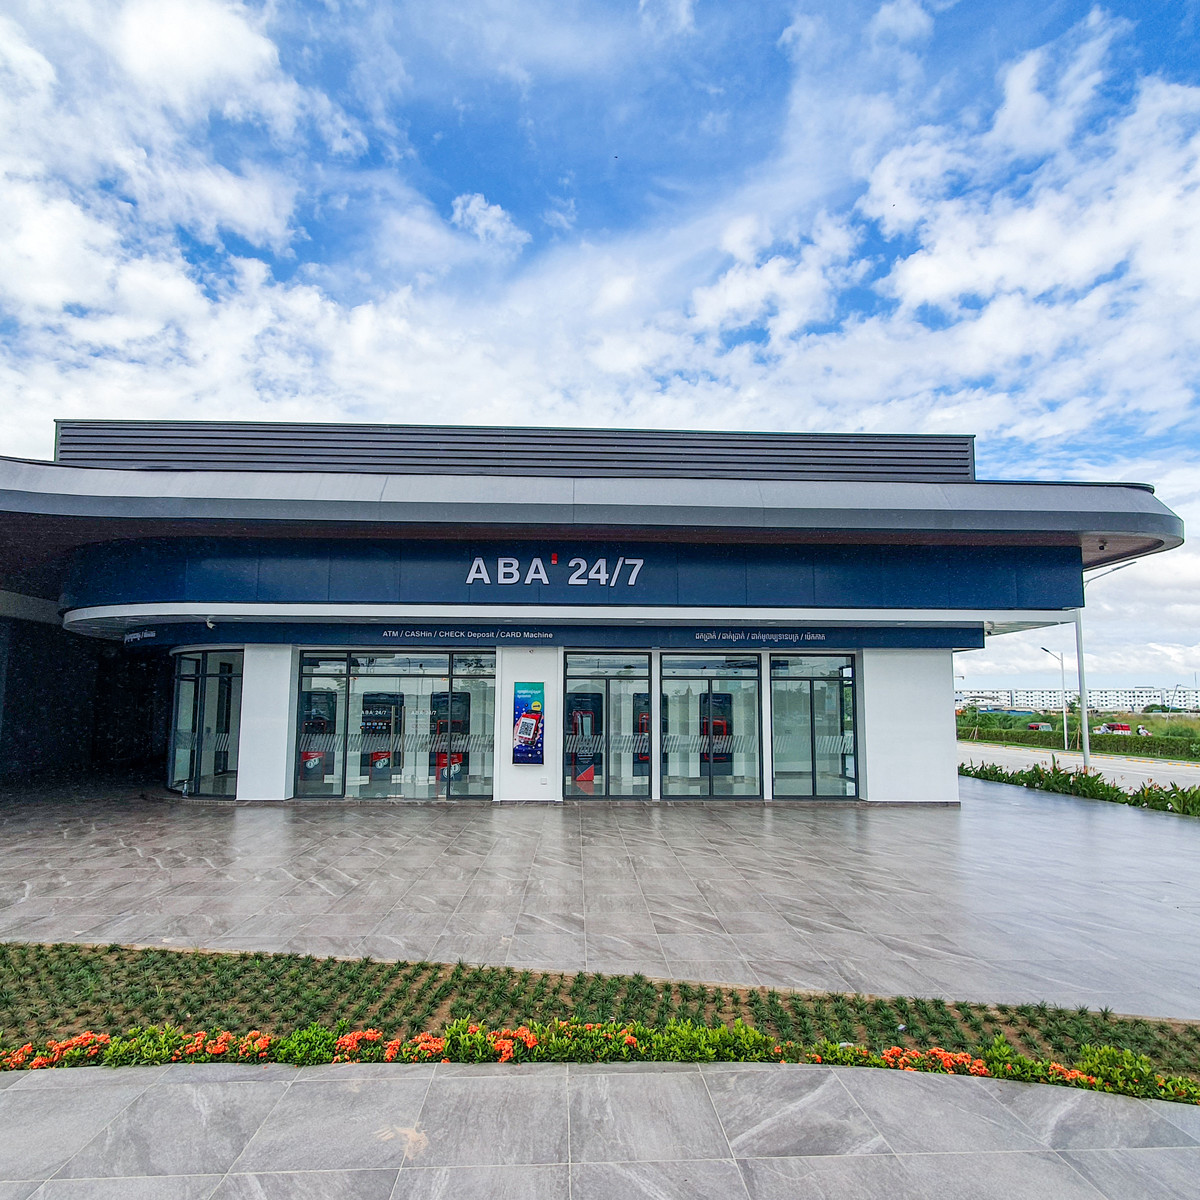 ABA 24/7 Self-banking network now expands to Mean Chey Avenue Mall!